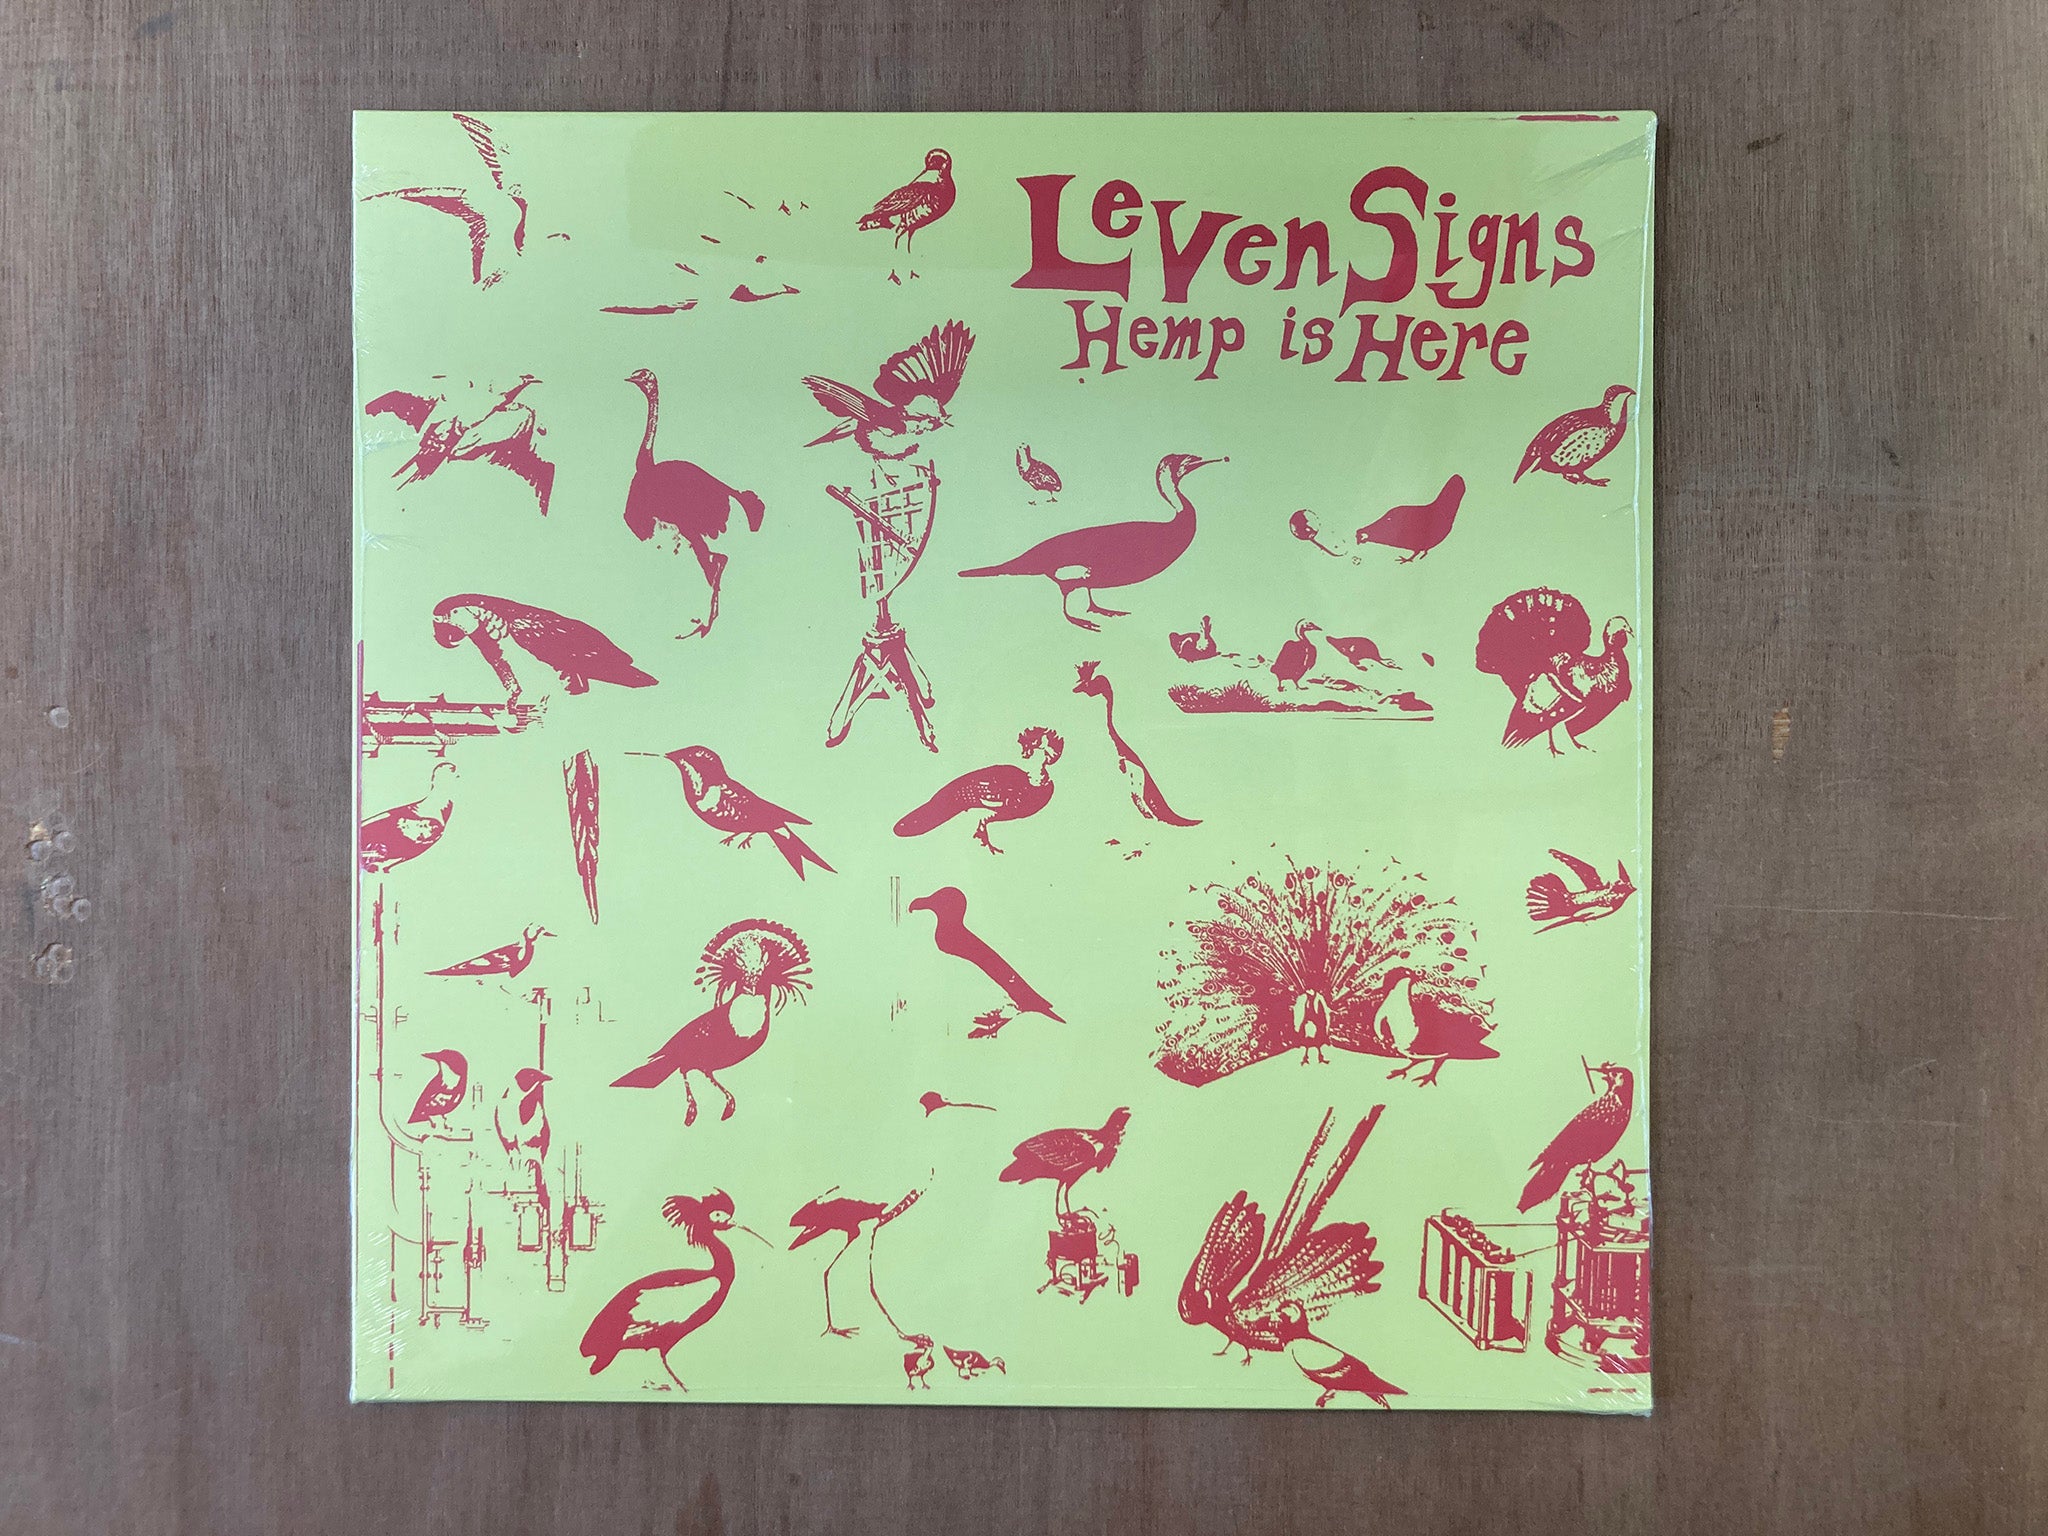 HEMP IS HERE LP by Leven Signs